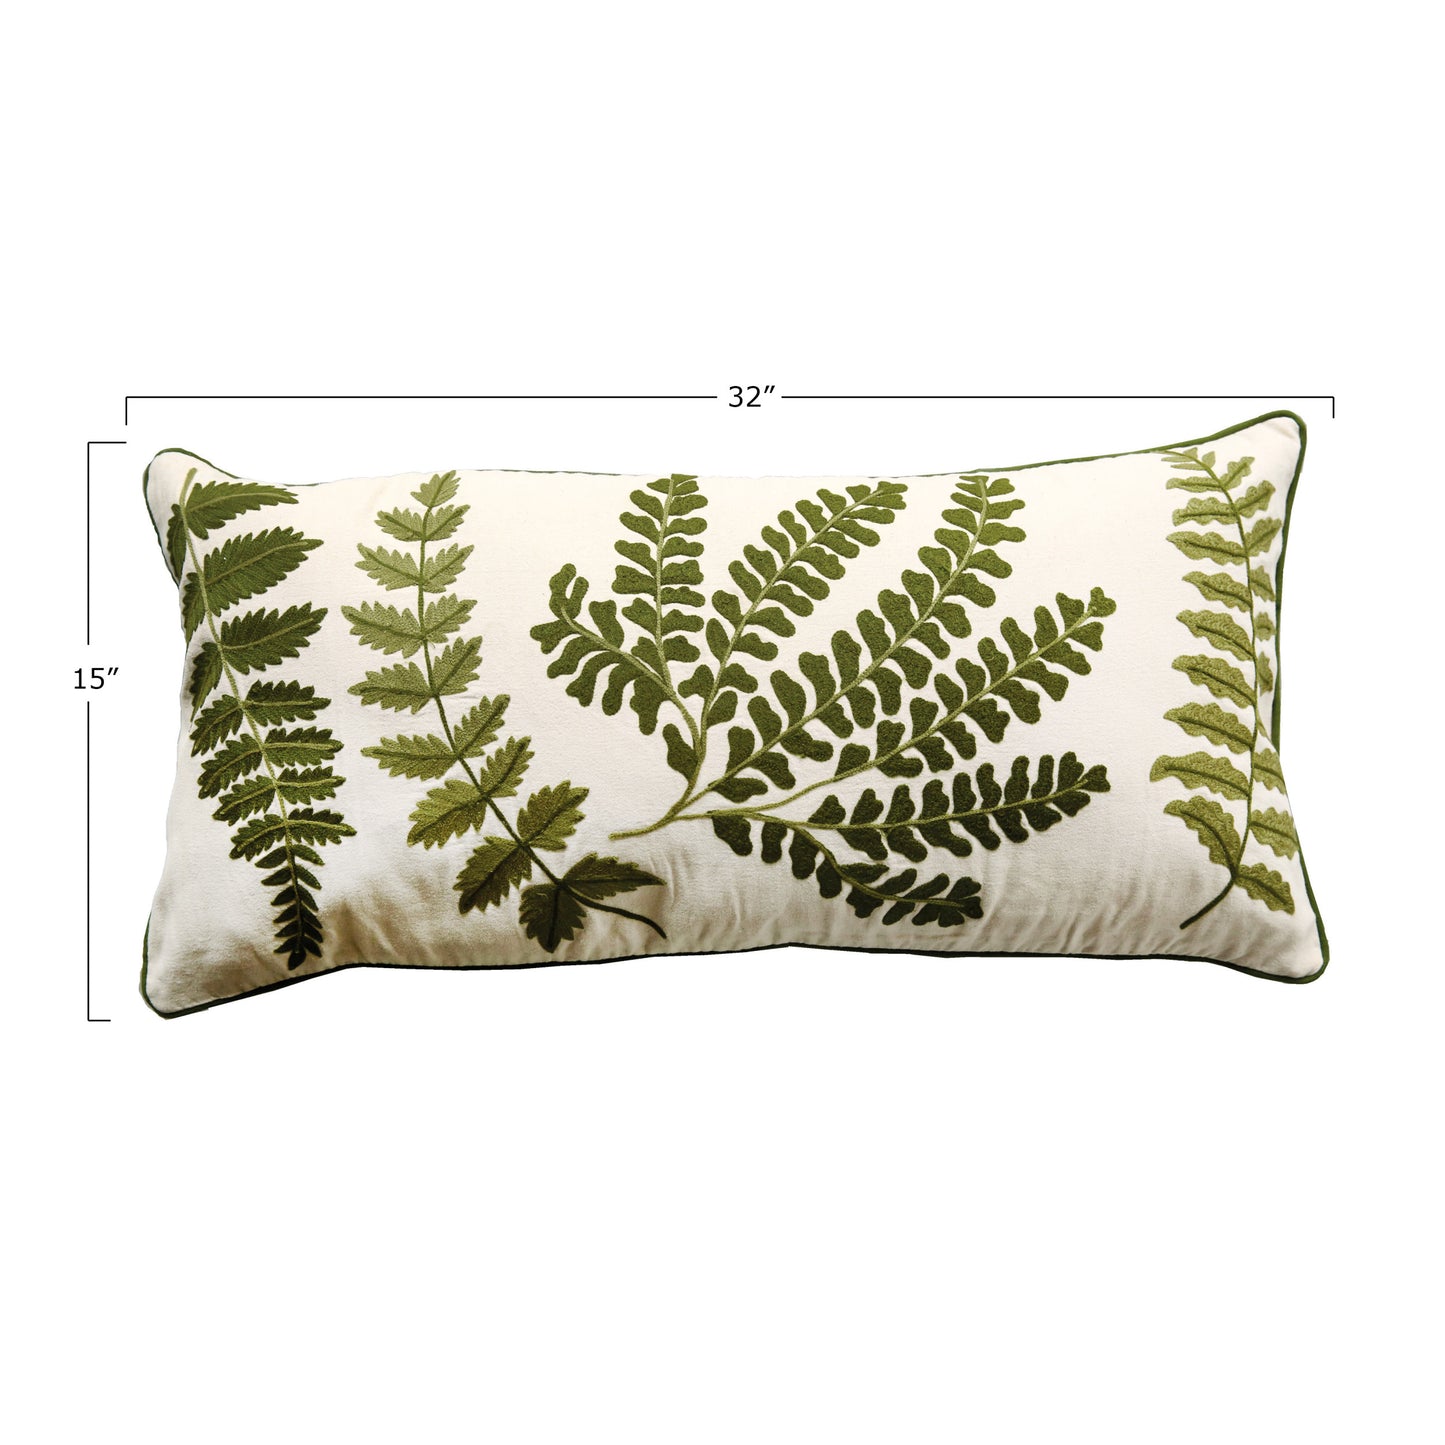 Lumbar Pillow with Fern Fronds Embroidery